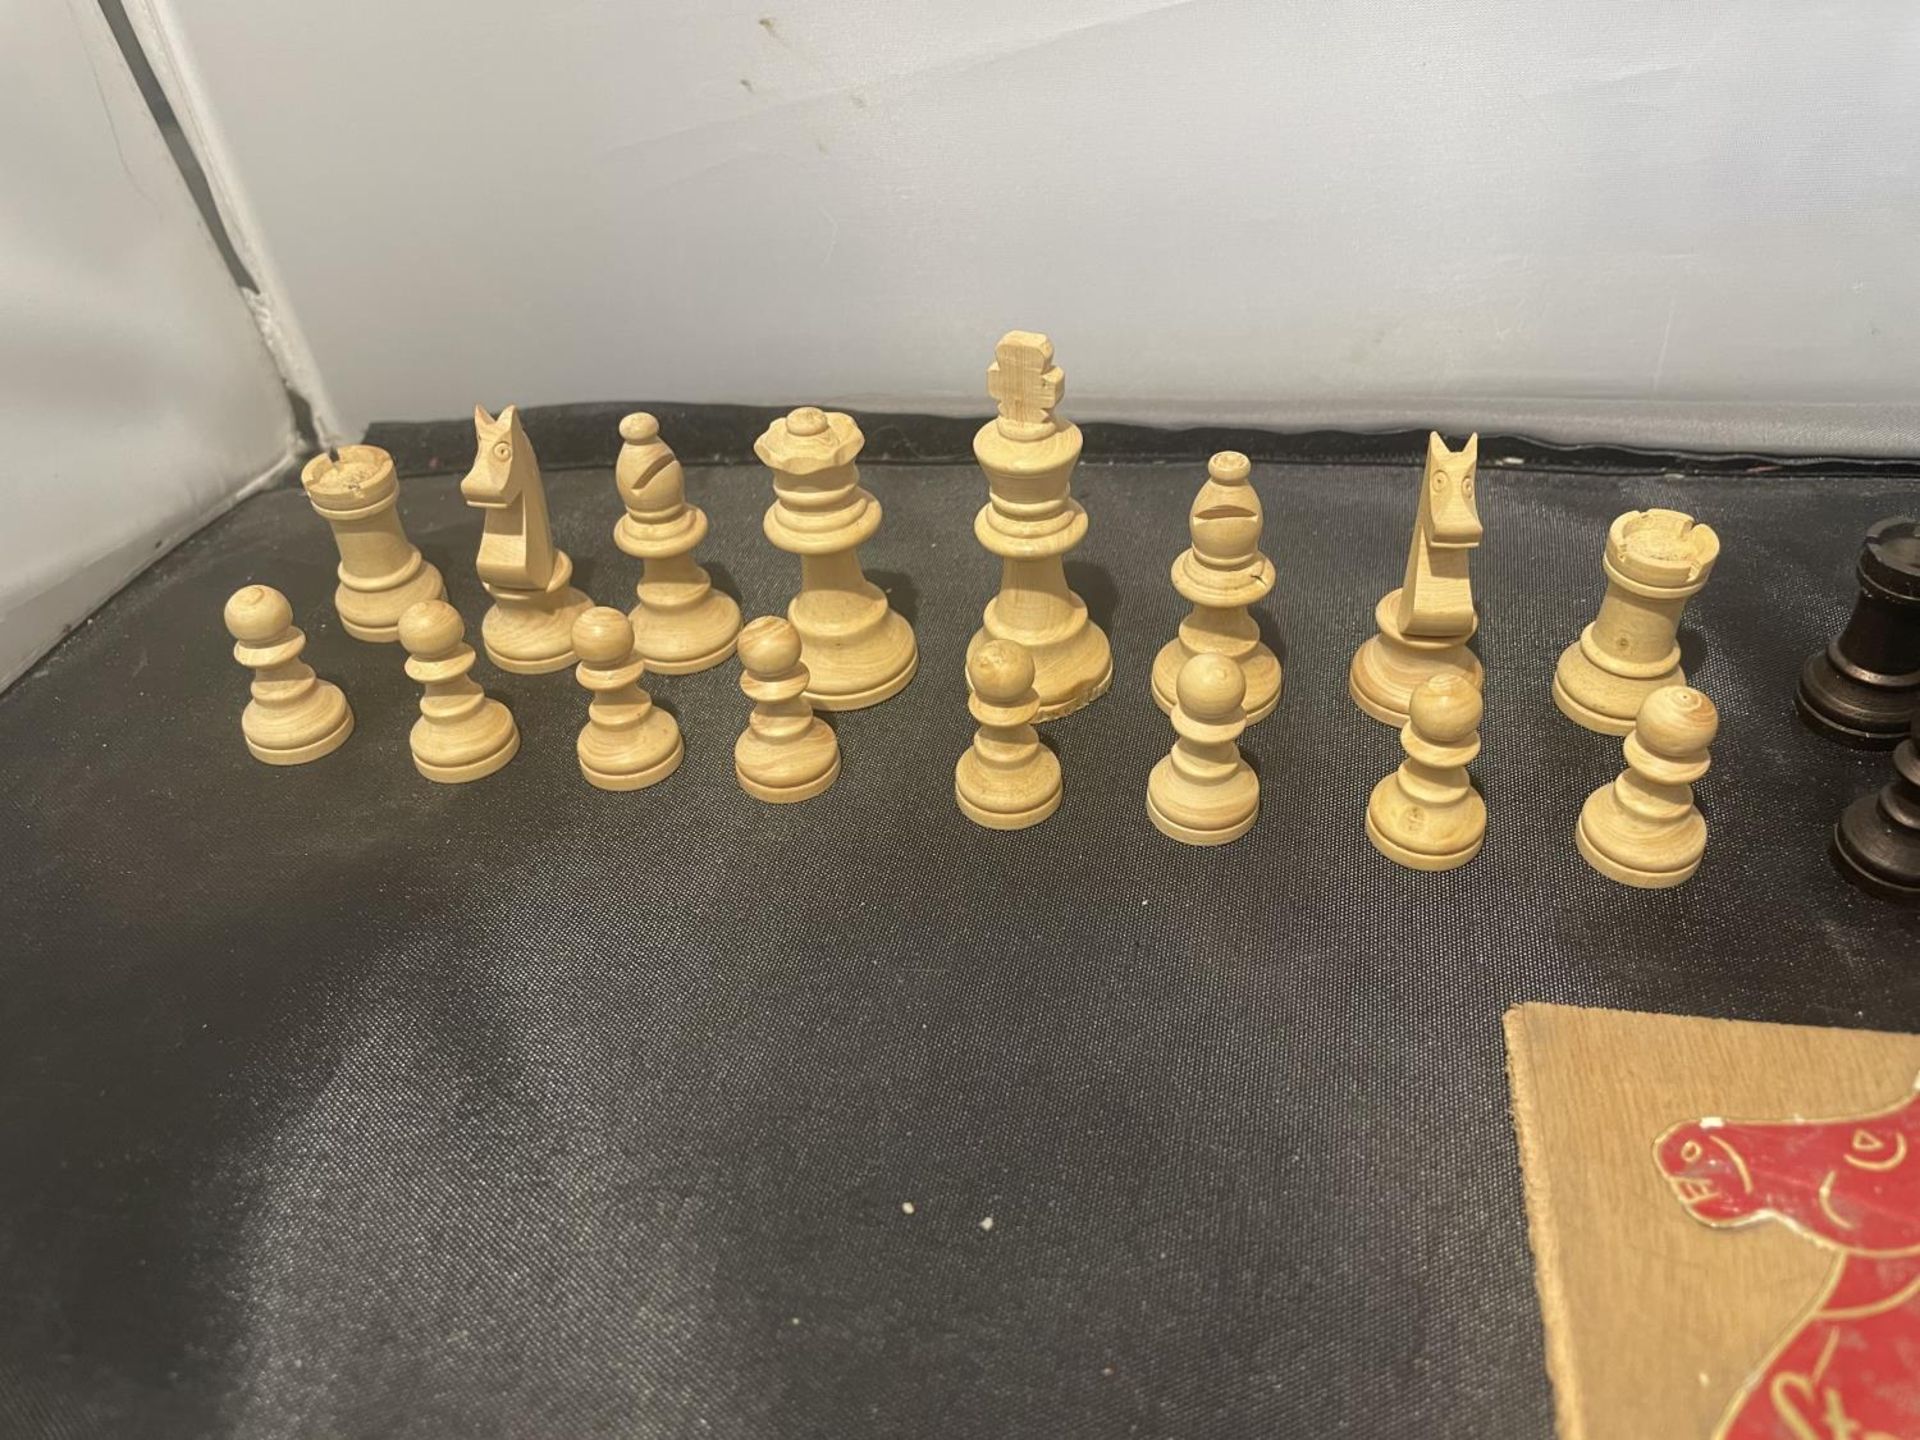 A COMPLETE STAUNTON BOXWOOD CHESS SET - Image 3 of 4